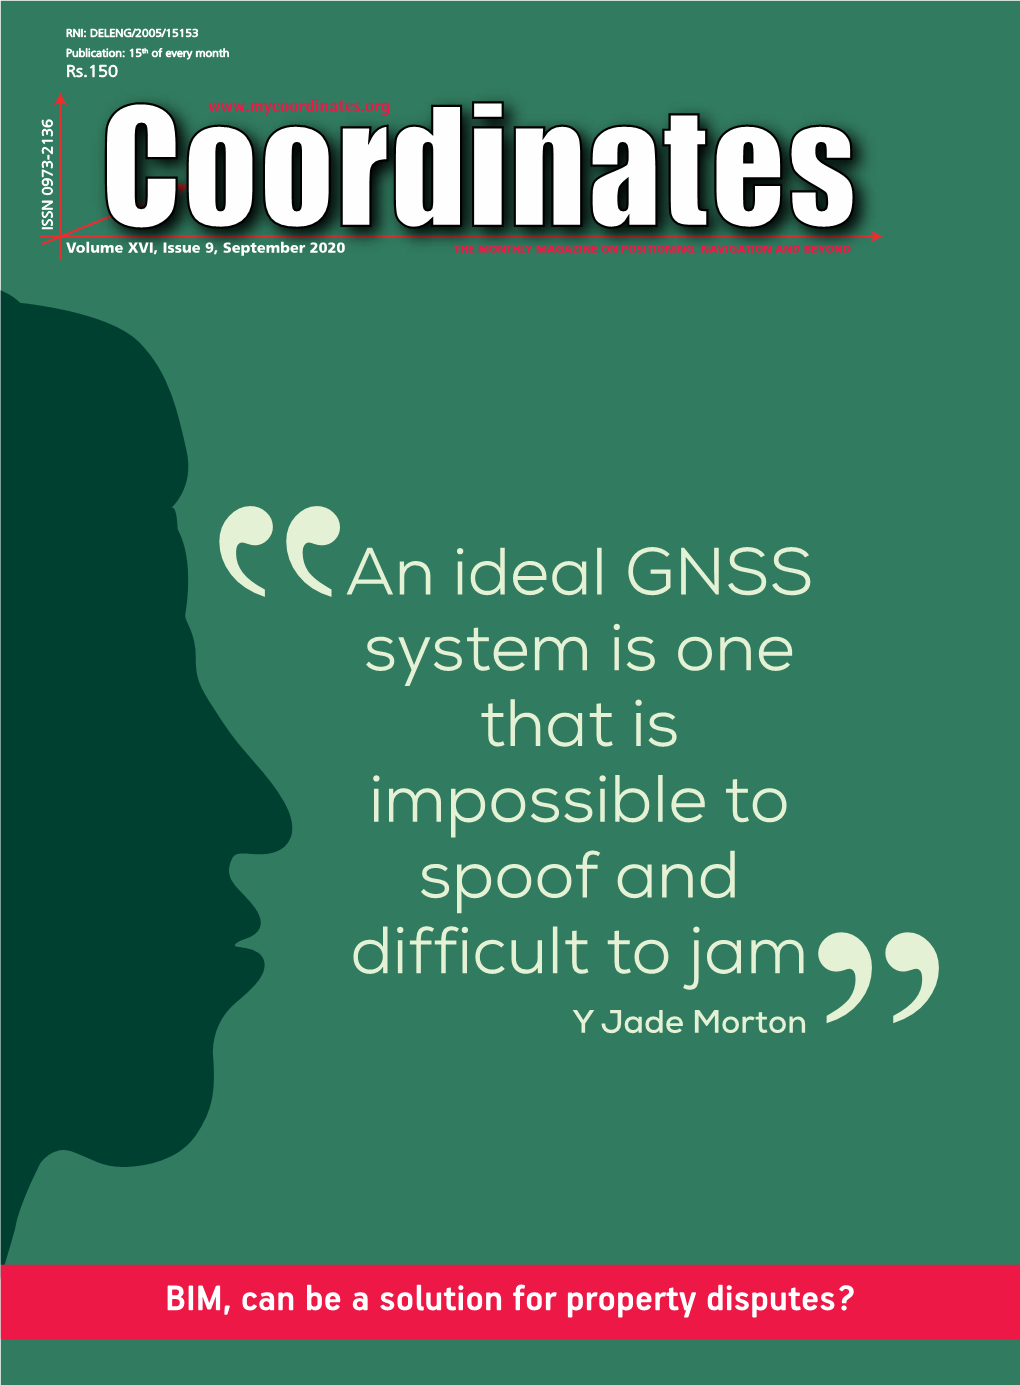 An Ideal GNSS System Is One That Is Impossible to Spoof and Difficult to Jam Y Jade Morton